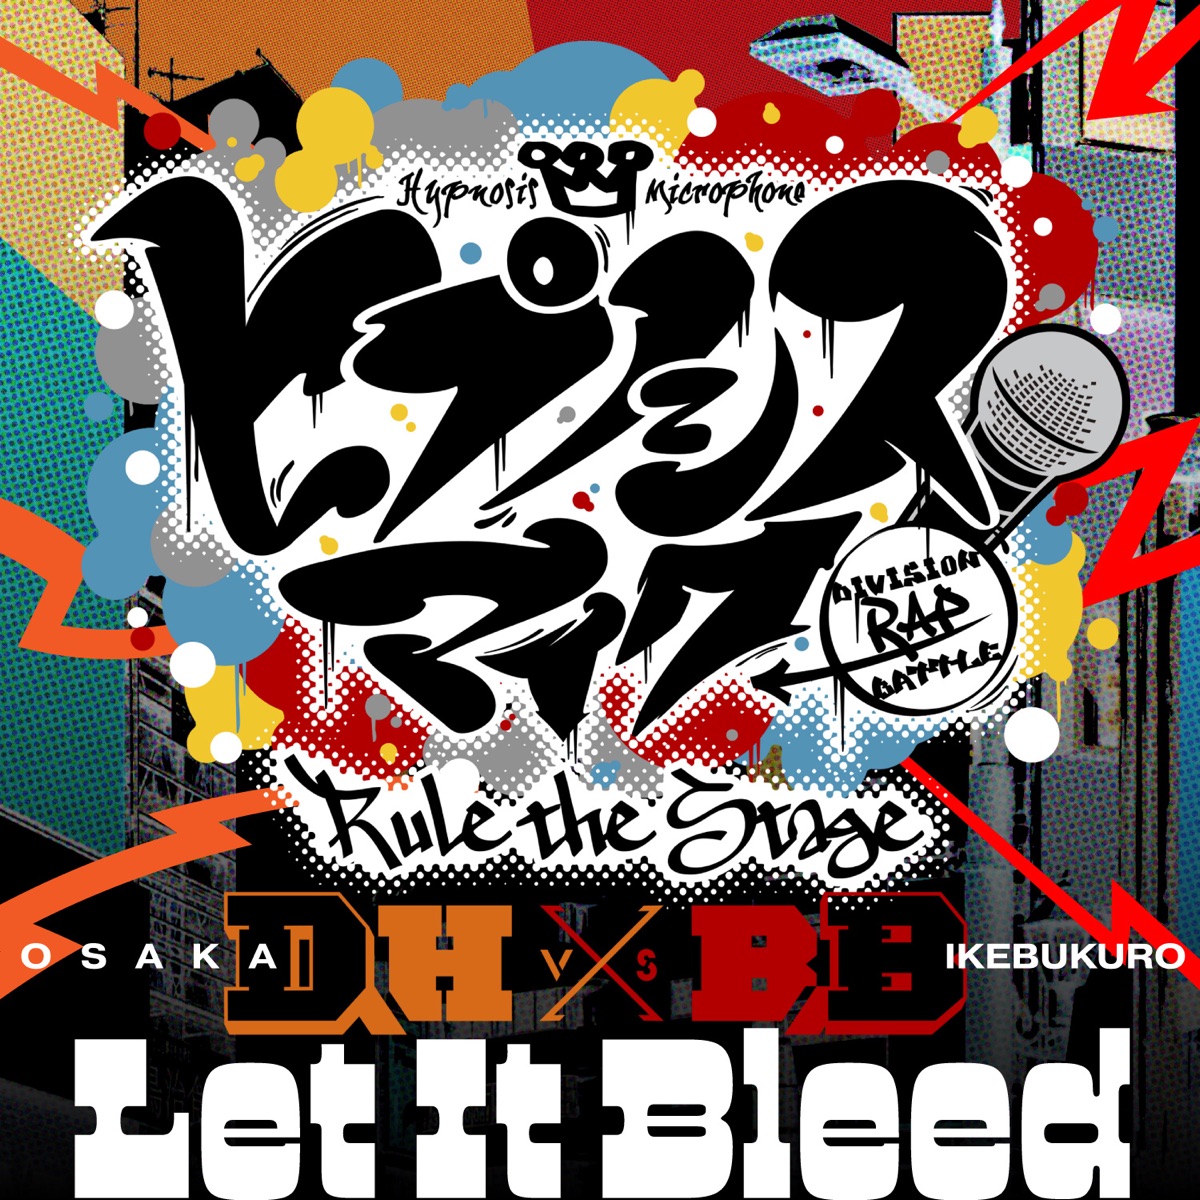 Cover art for『Hypnosis Mic -D.R.B- Rule the Stage (Dotsuitare Honpo・Buster Bros!!!) - Let It Bleed』from the release『Let It Bleed